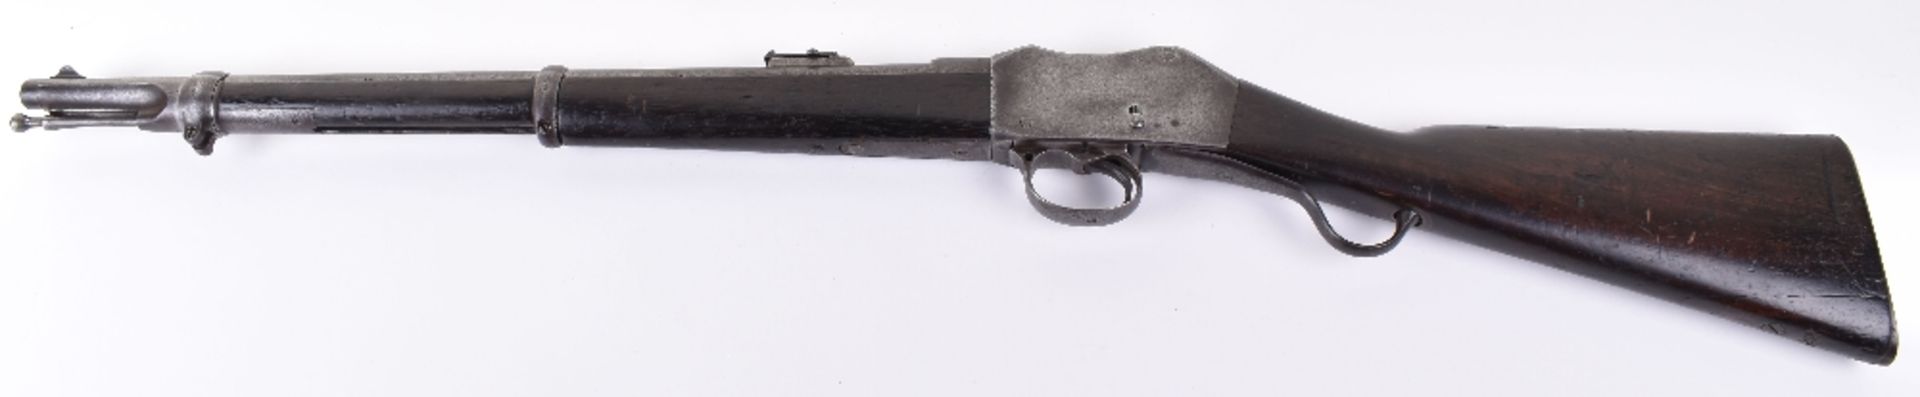 A .477/.550 Martini-Henry I.C.1 cavalry carbine - Image 10 of 12